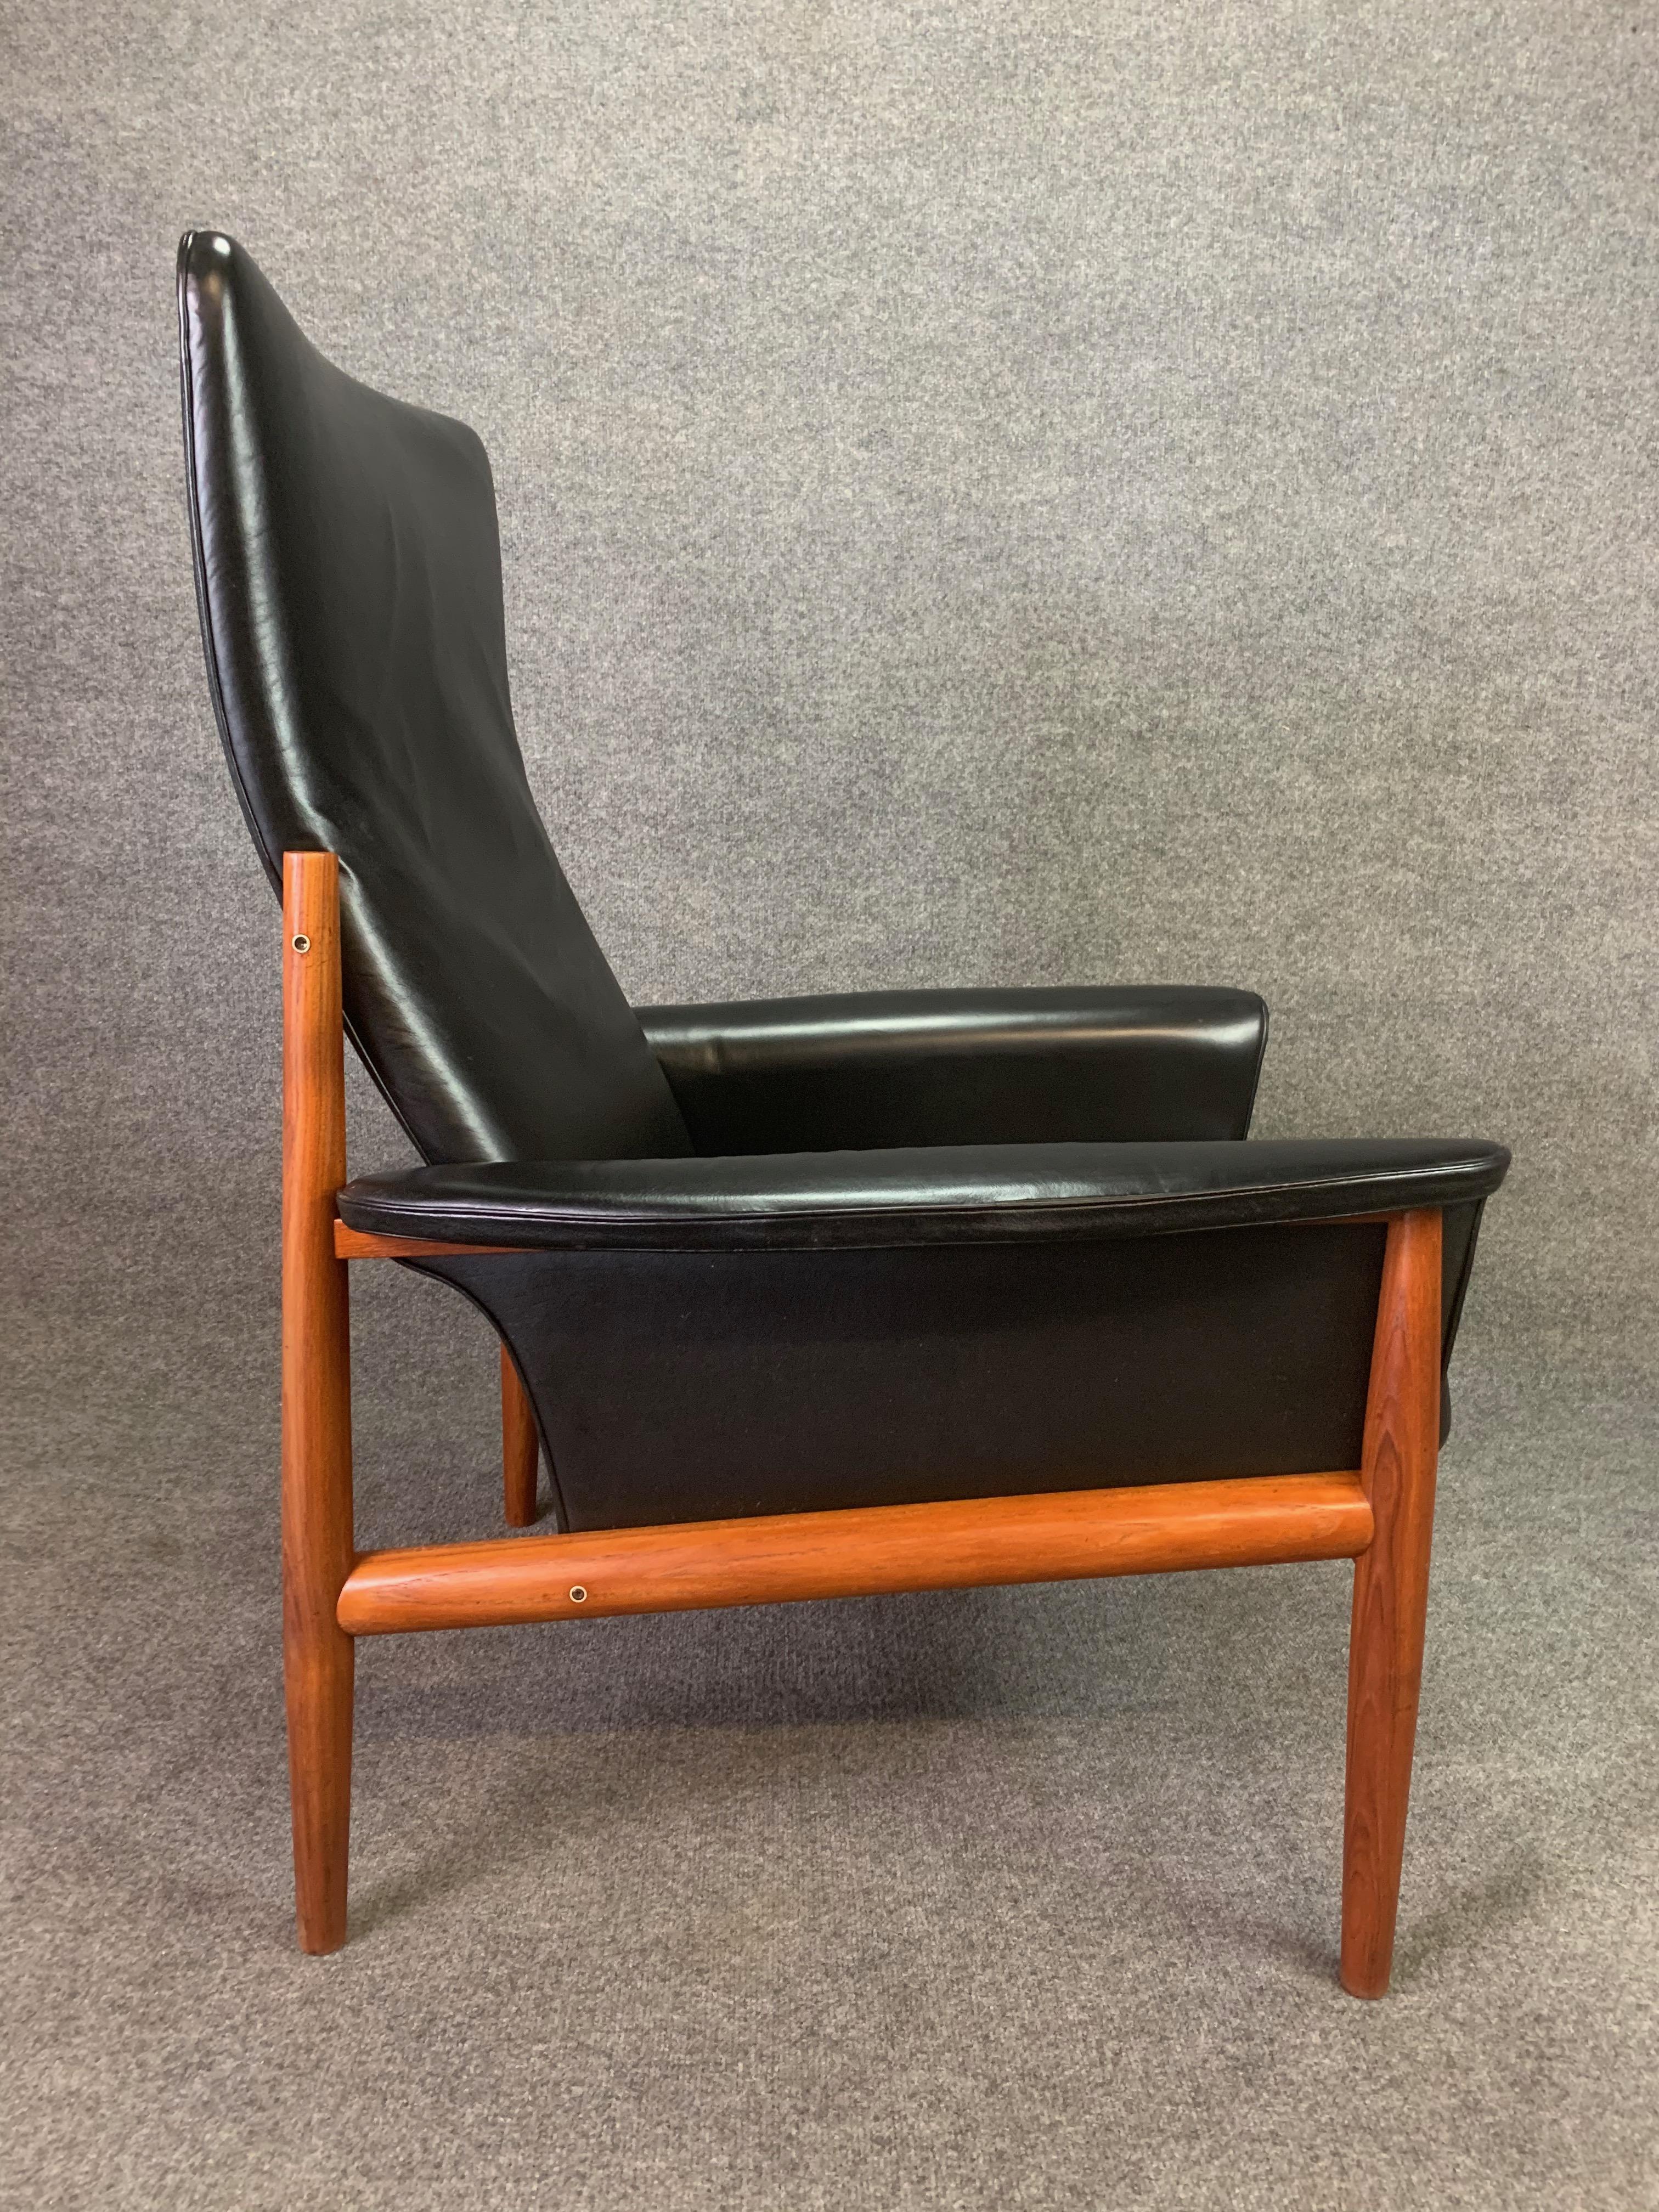 Scandinavian Modern Vintage Danish Midcentury Teak and Leather Lounge Chair by Grete Jalk For Sale